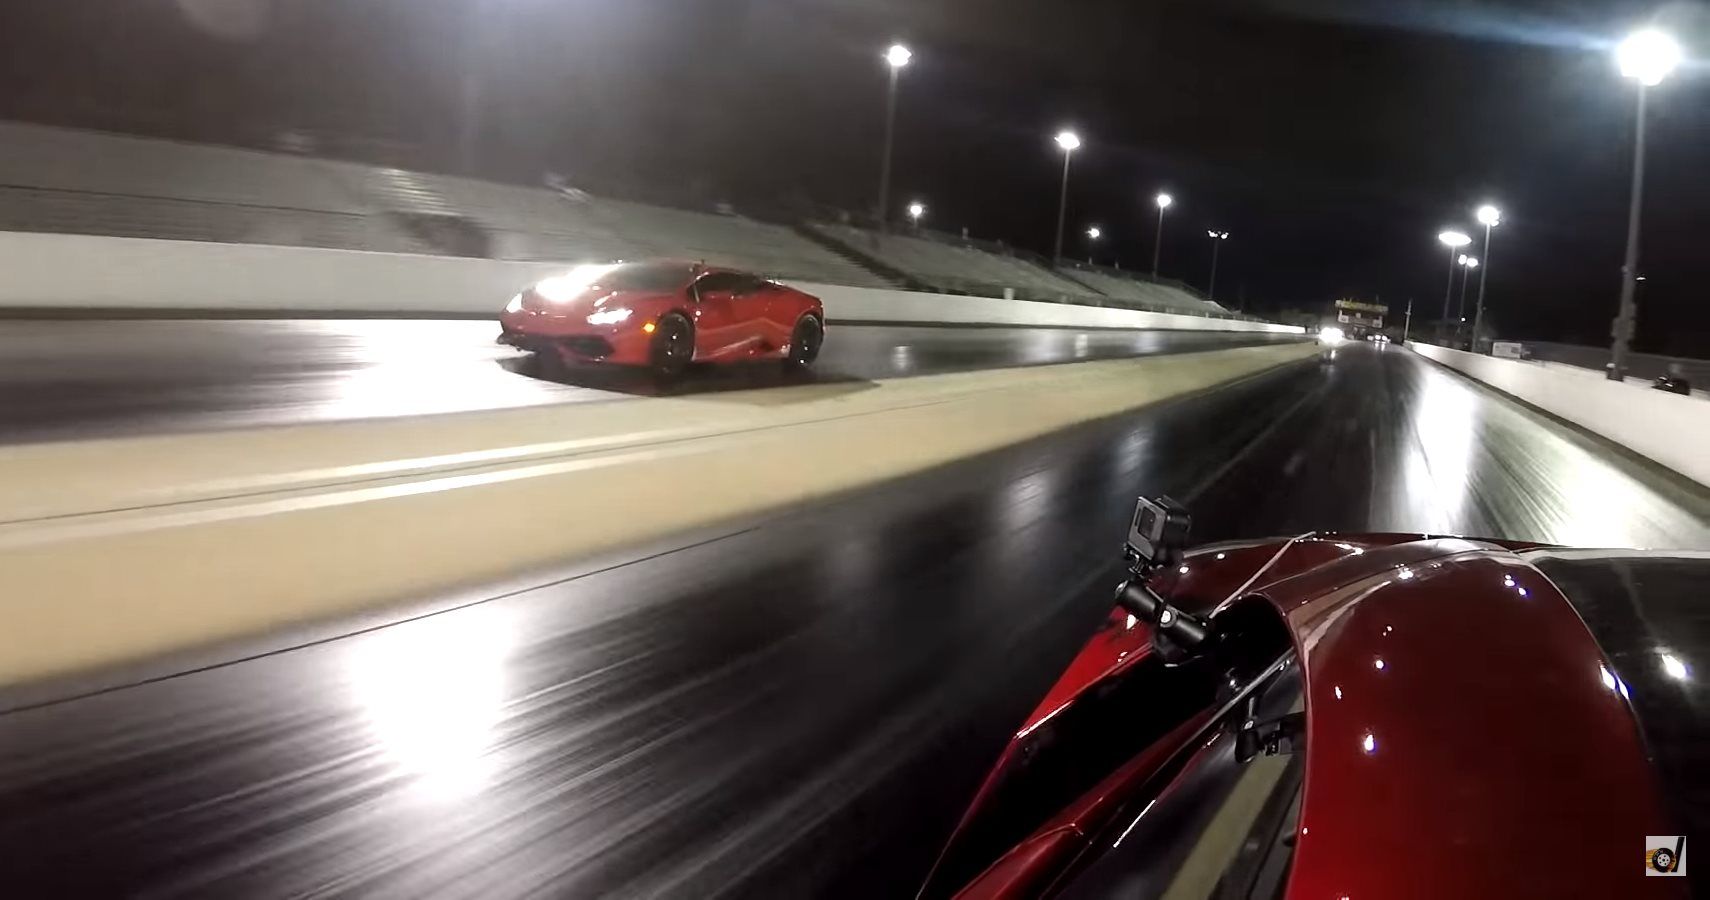 Watch A Lamborghini Huracan LP610-4 Take On An Acura NSX In Drag Race Action